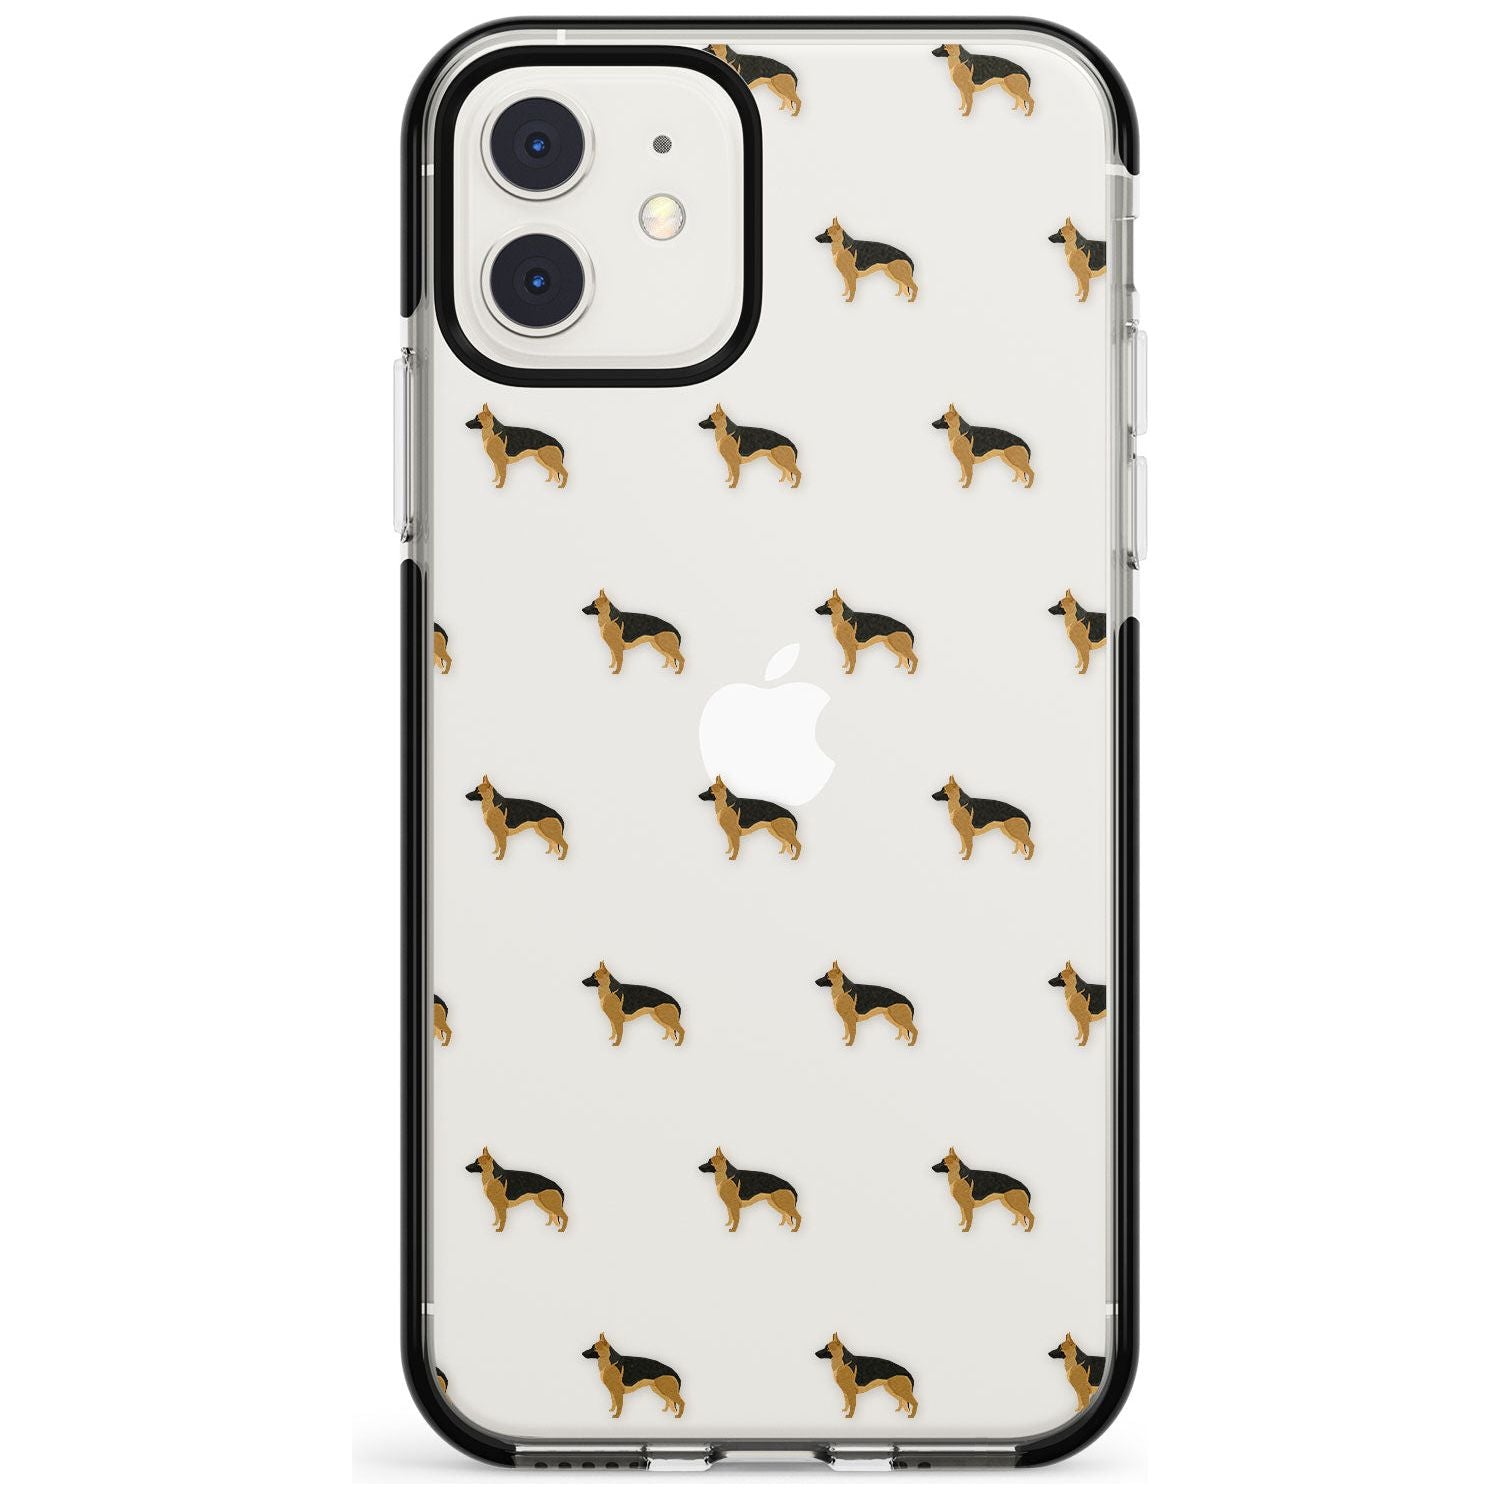 German Sherpard Dog Pattern Clear Black Impact Phone Case for iPhone 11